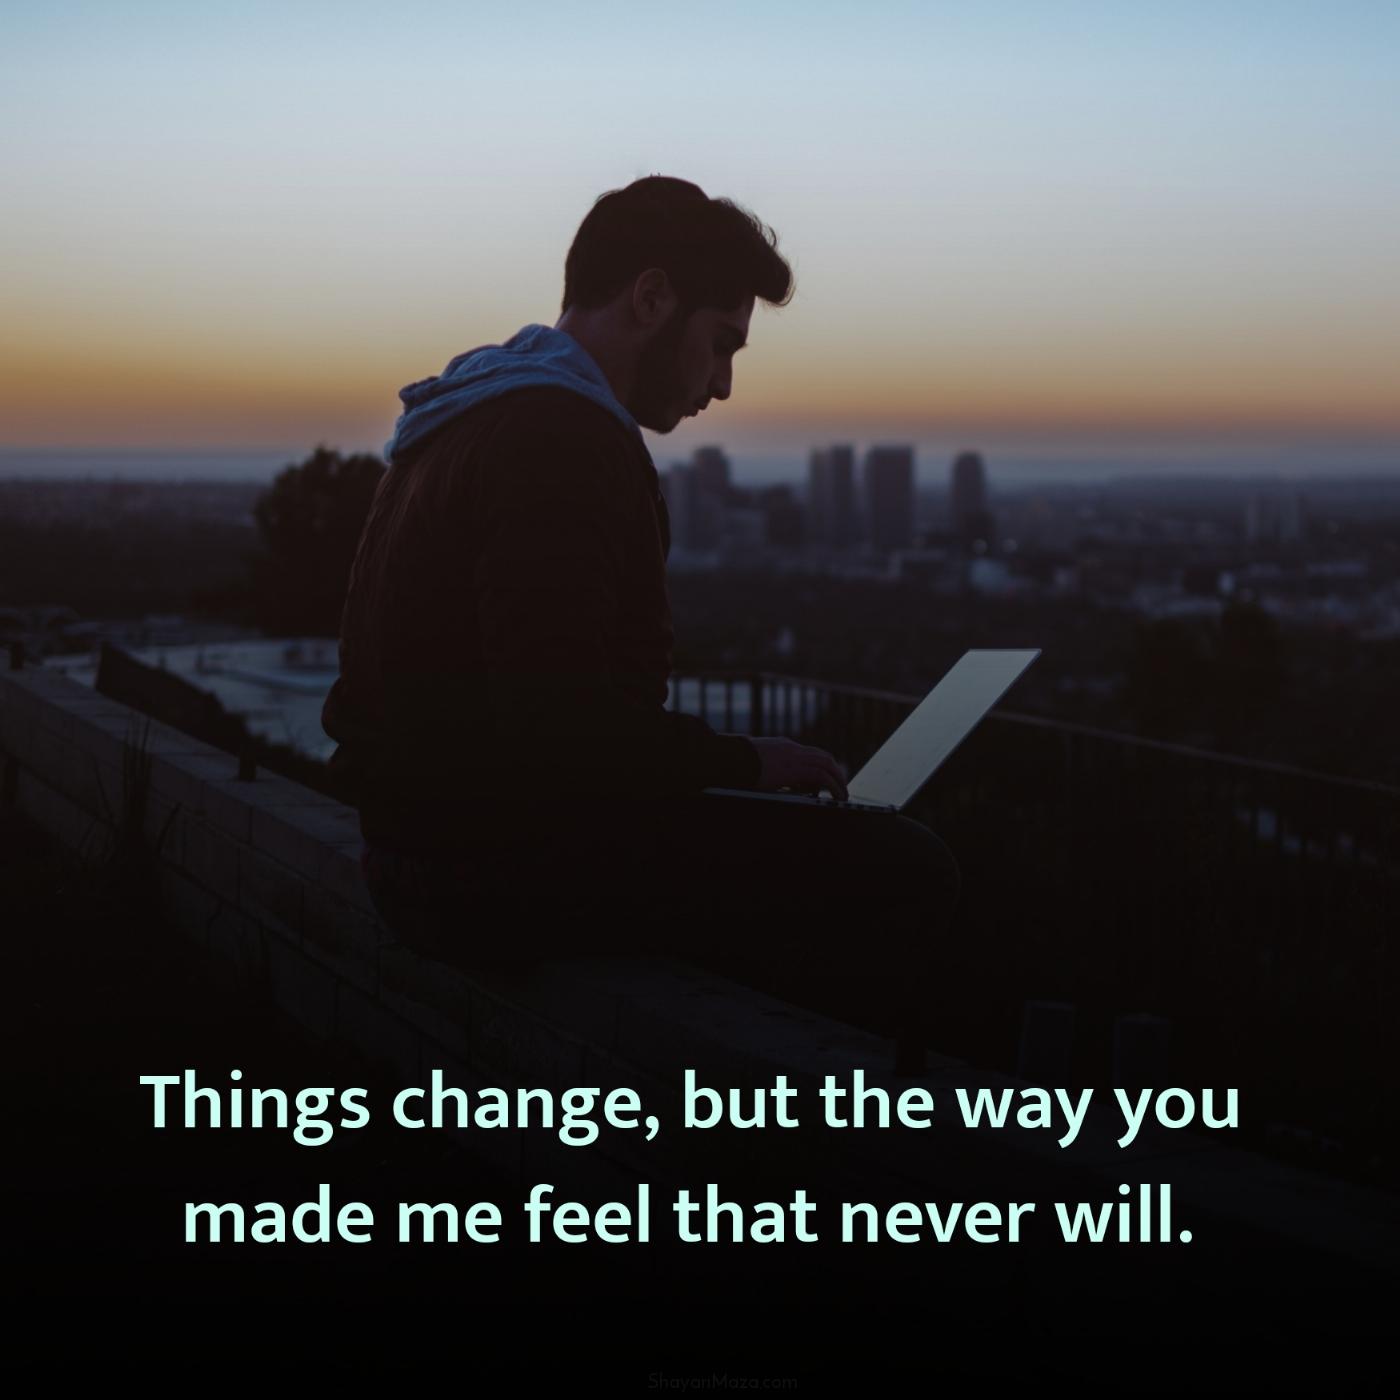 Things change but the way you made me feel that never will